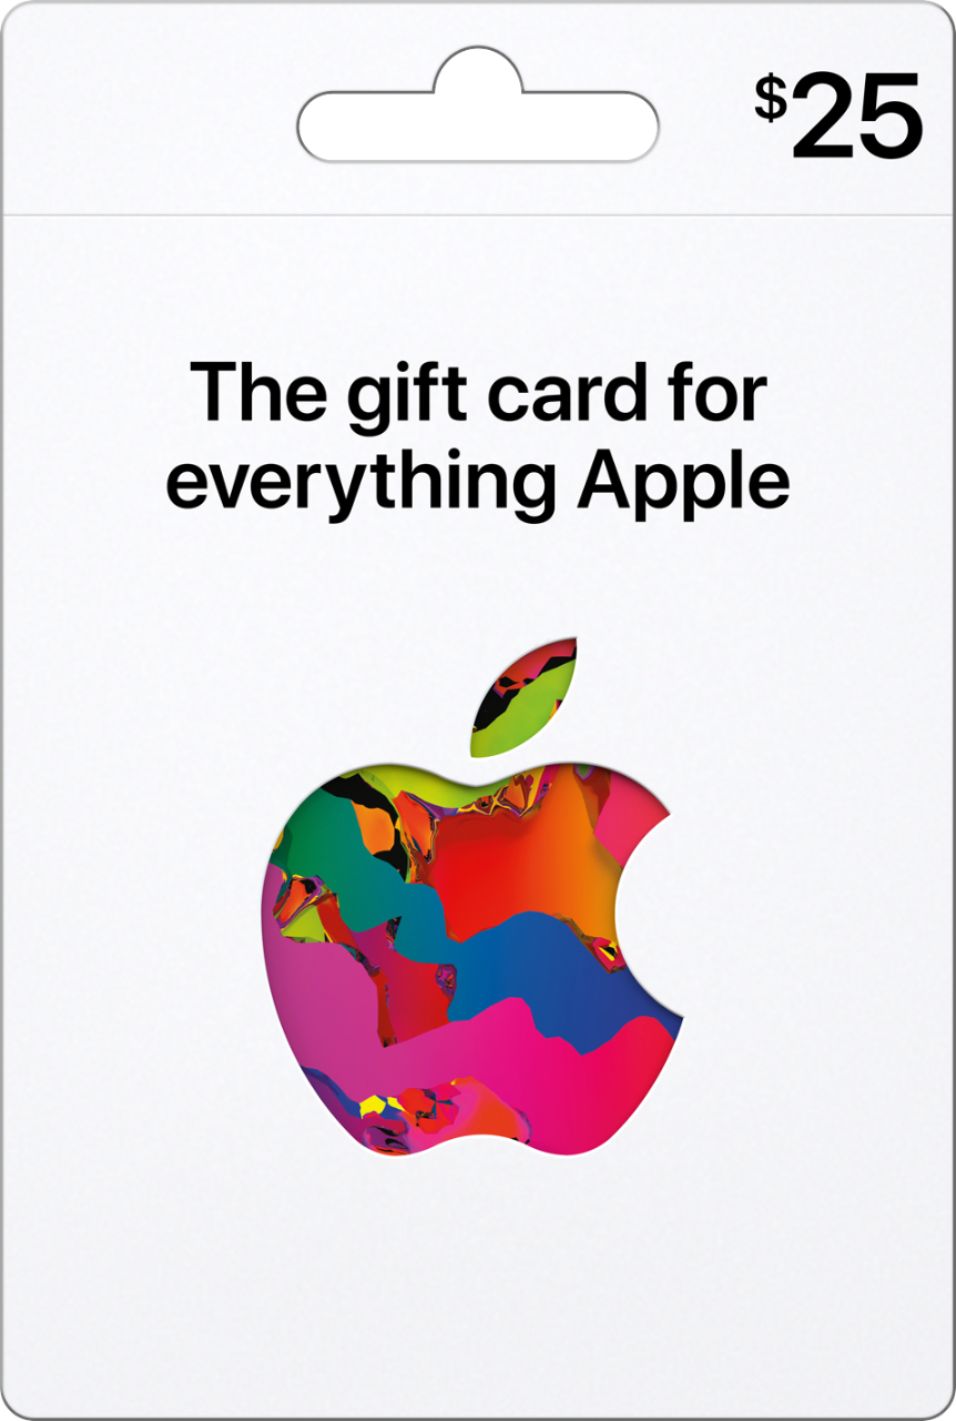 ITUNES GIFT CARD $25